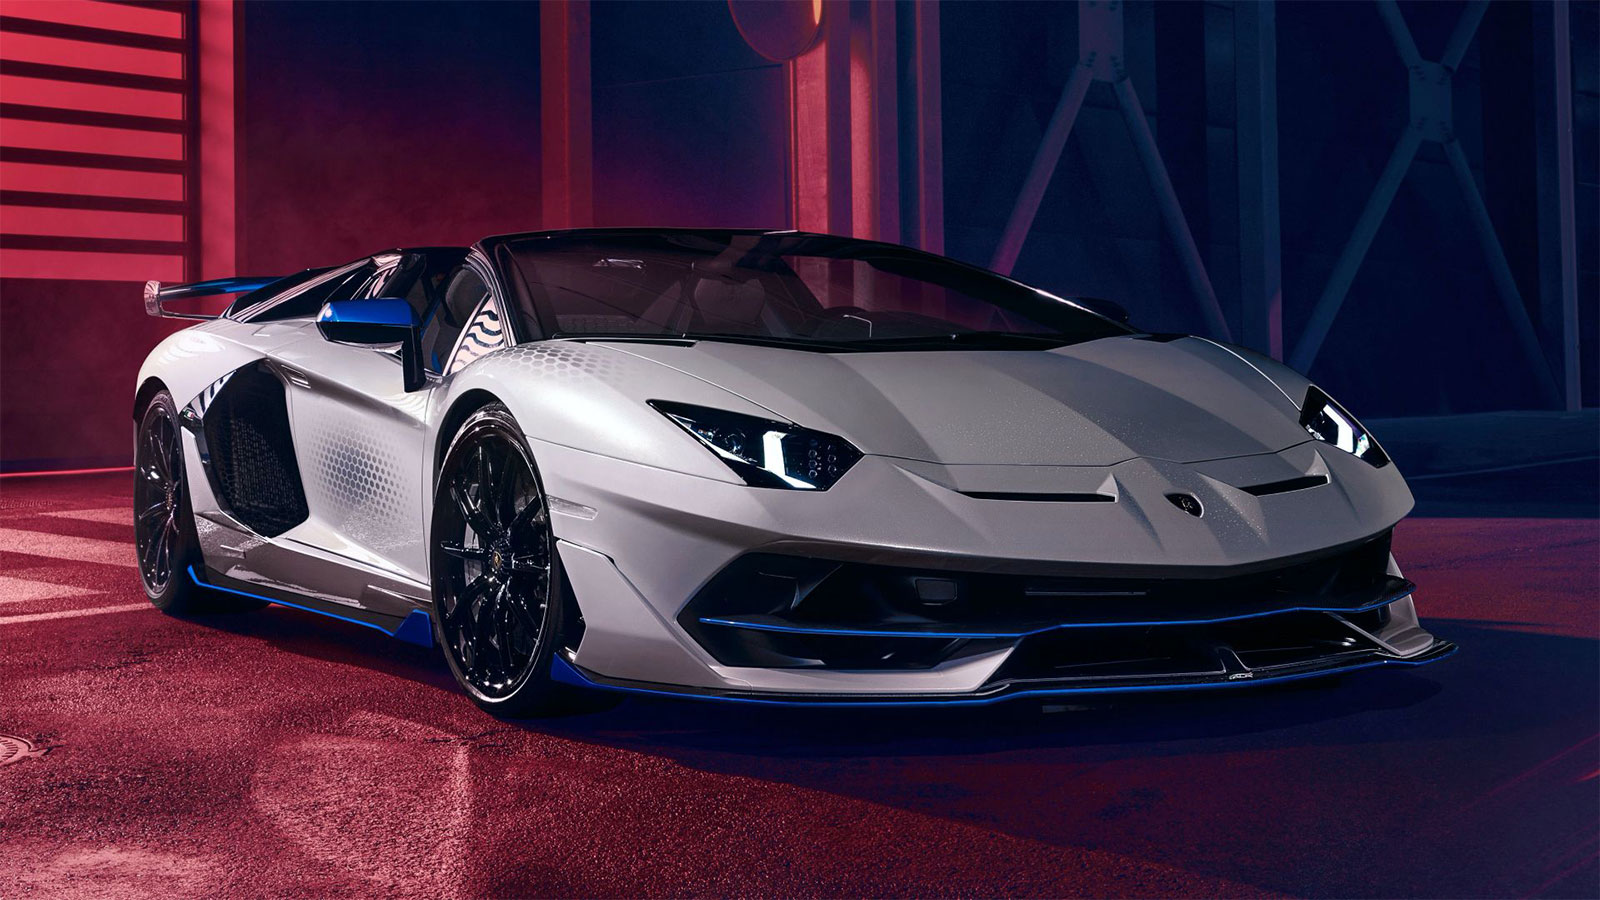 Indians buy their Lamborghinis on EMIs, not with bags full of cash